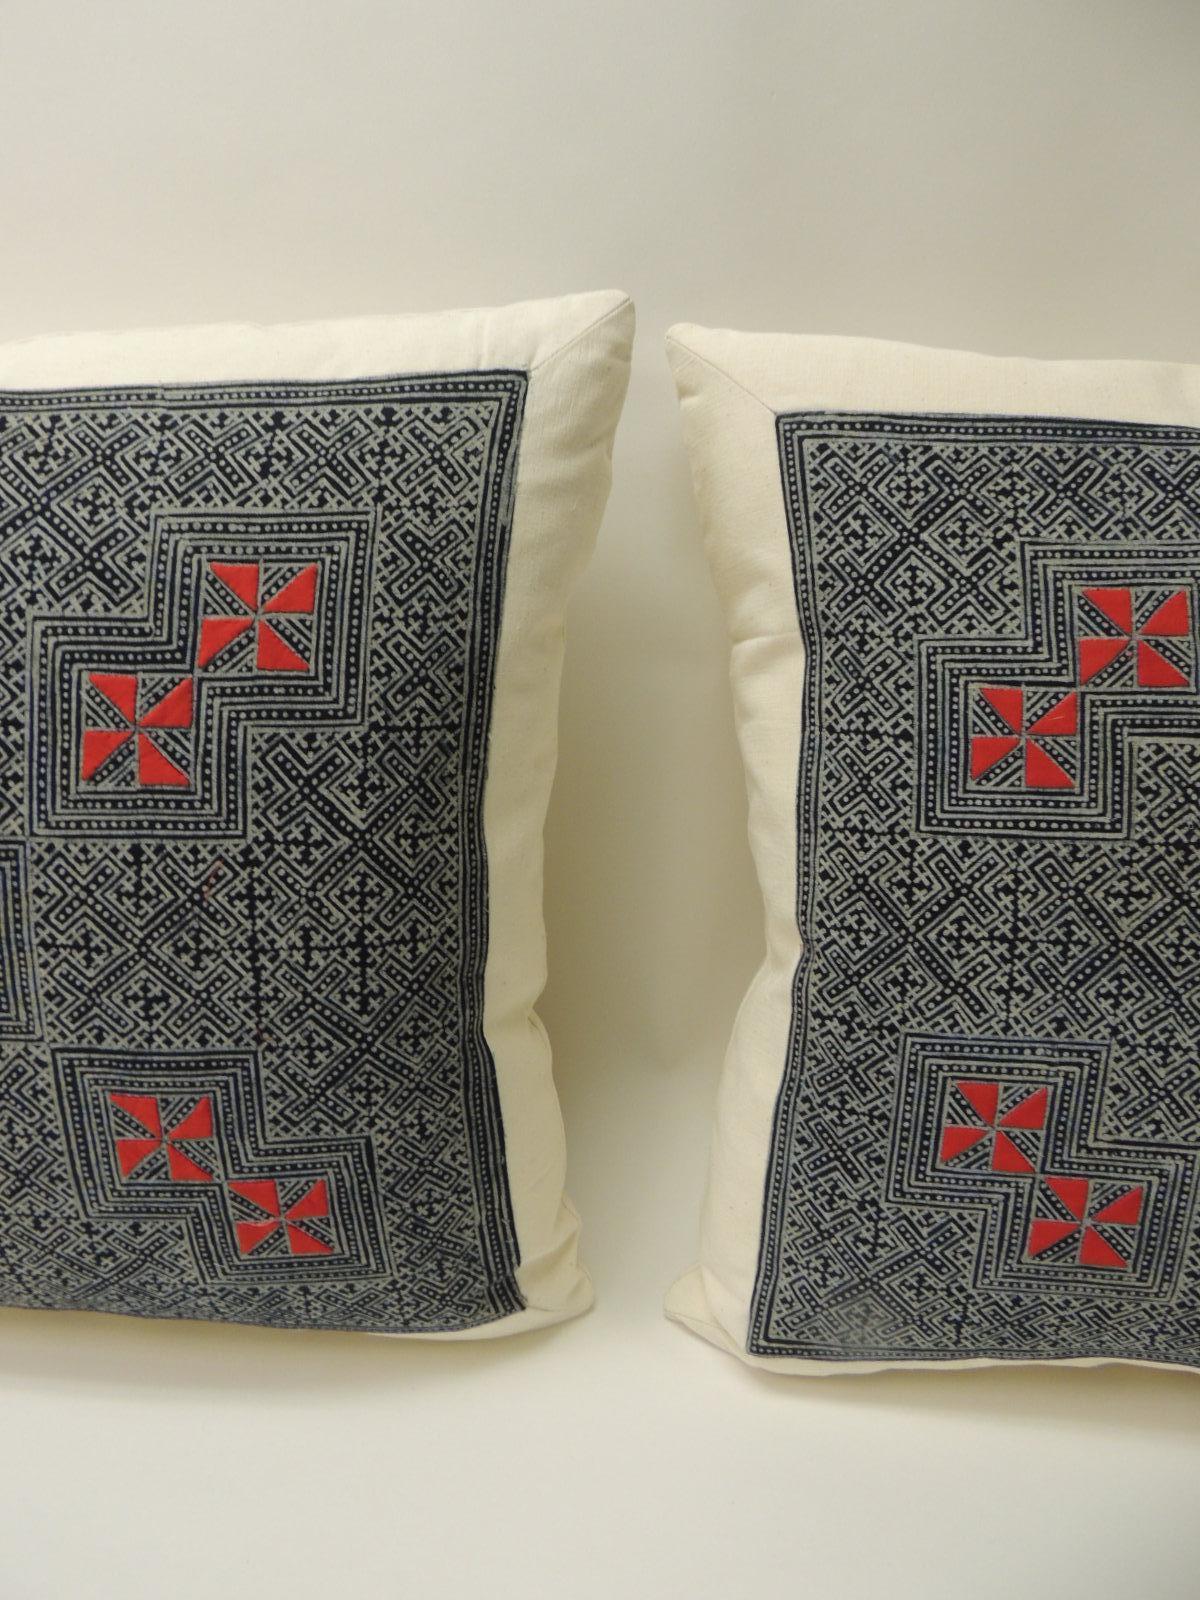 Pair of vintage Asian hand blocked red and indigo square decorative pillows
Decorative square pillows handcrafted with a vintage Asian hand blocked batik red and indigo textile. The decorative pillows depict a hand blocked technique in the front